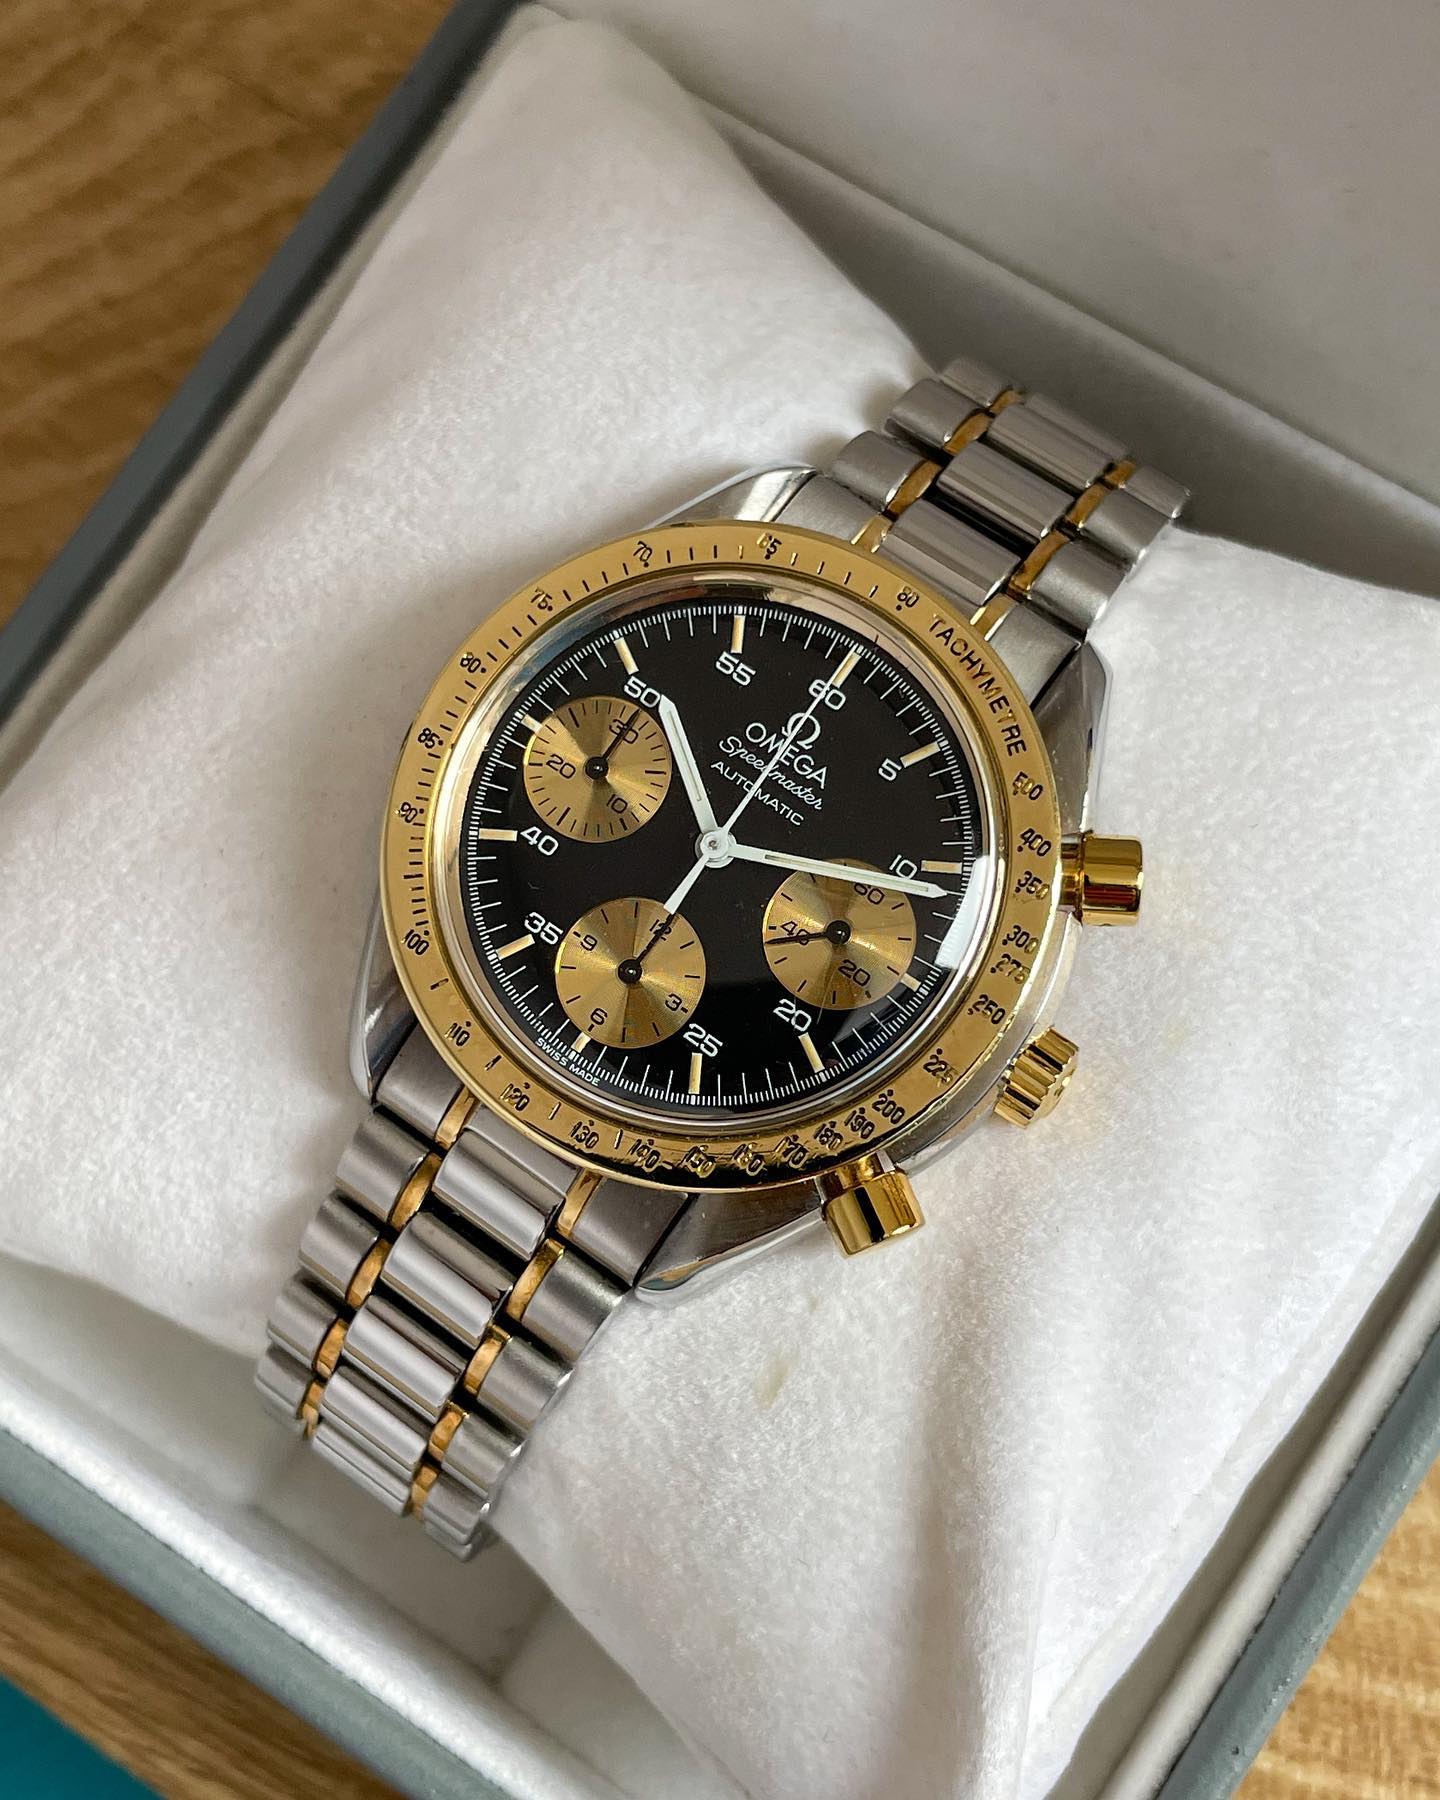 Black dial with golden bezel. Gold minute counter and chronograph subdials. Painted indices with 5 minute increments. White minute, hour and chronograph seconds hand. Subdials with black hands. Omega Speedmaster Reduced 175.0033